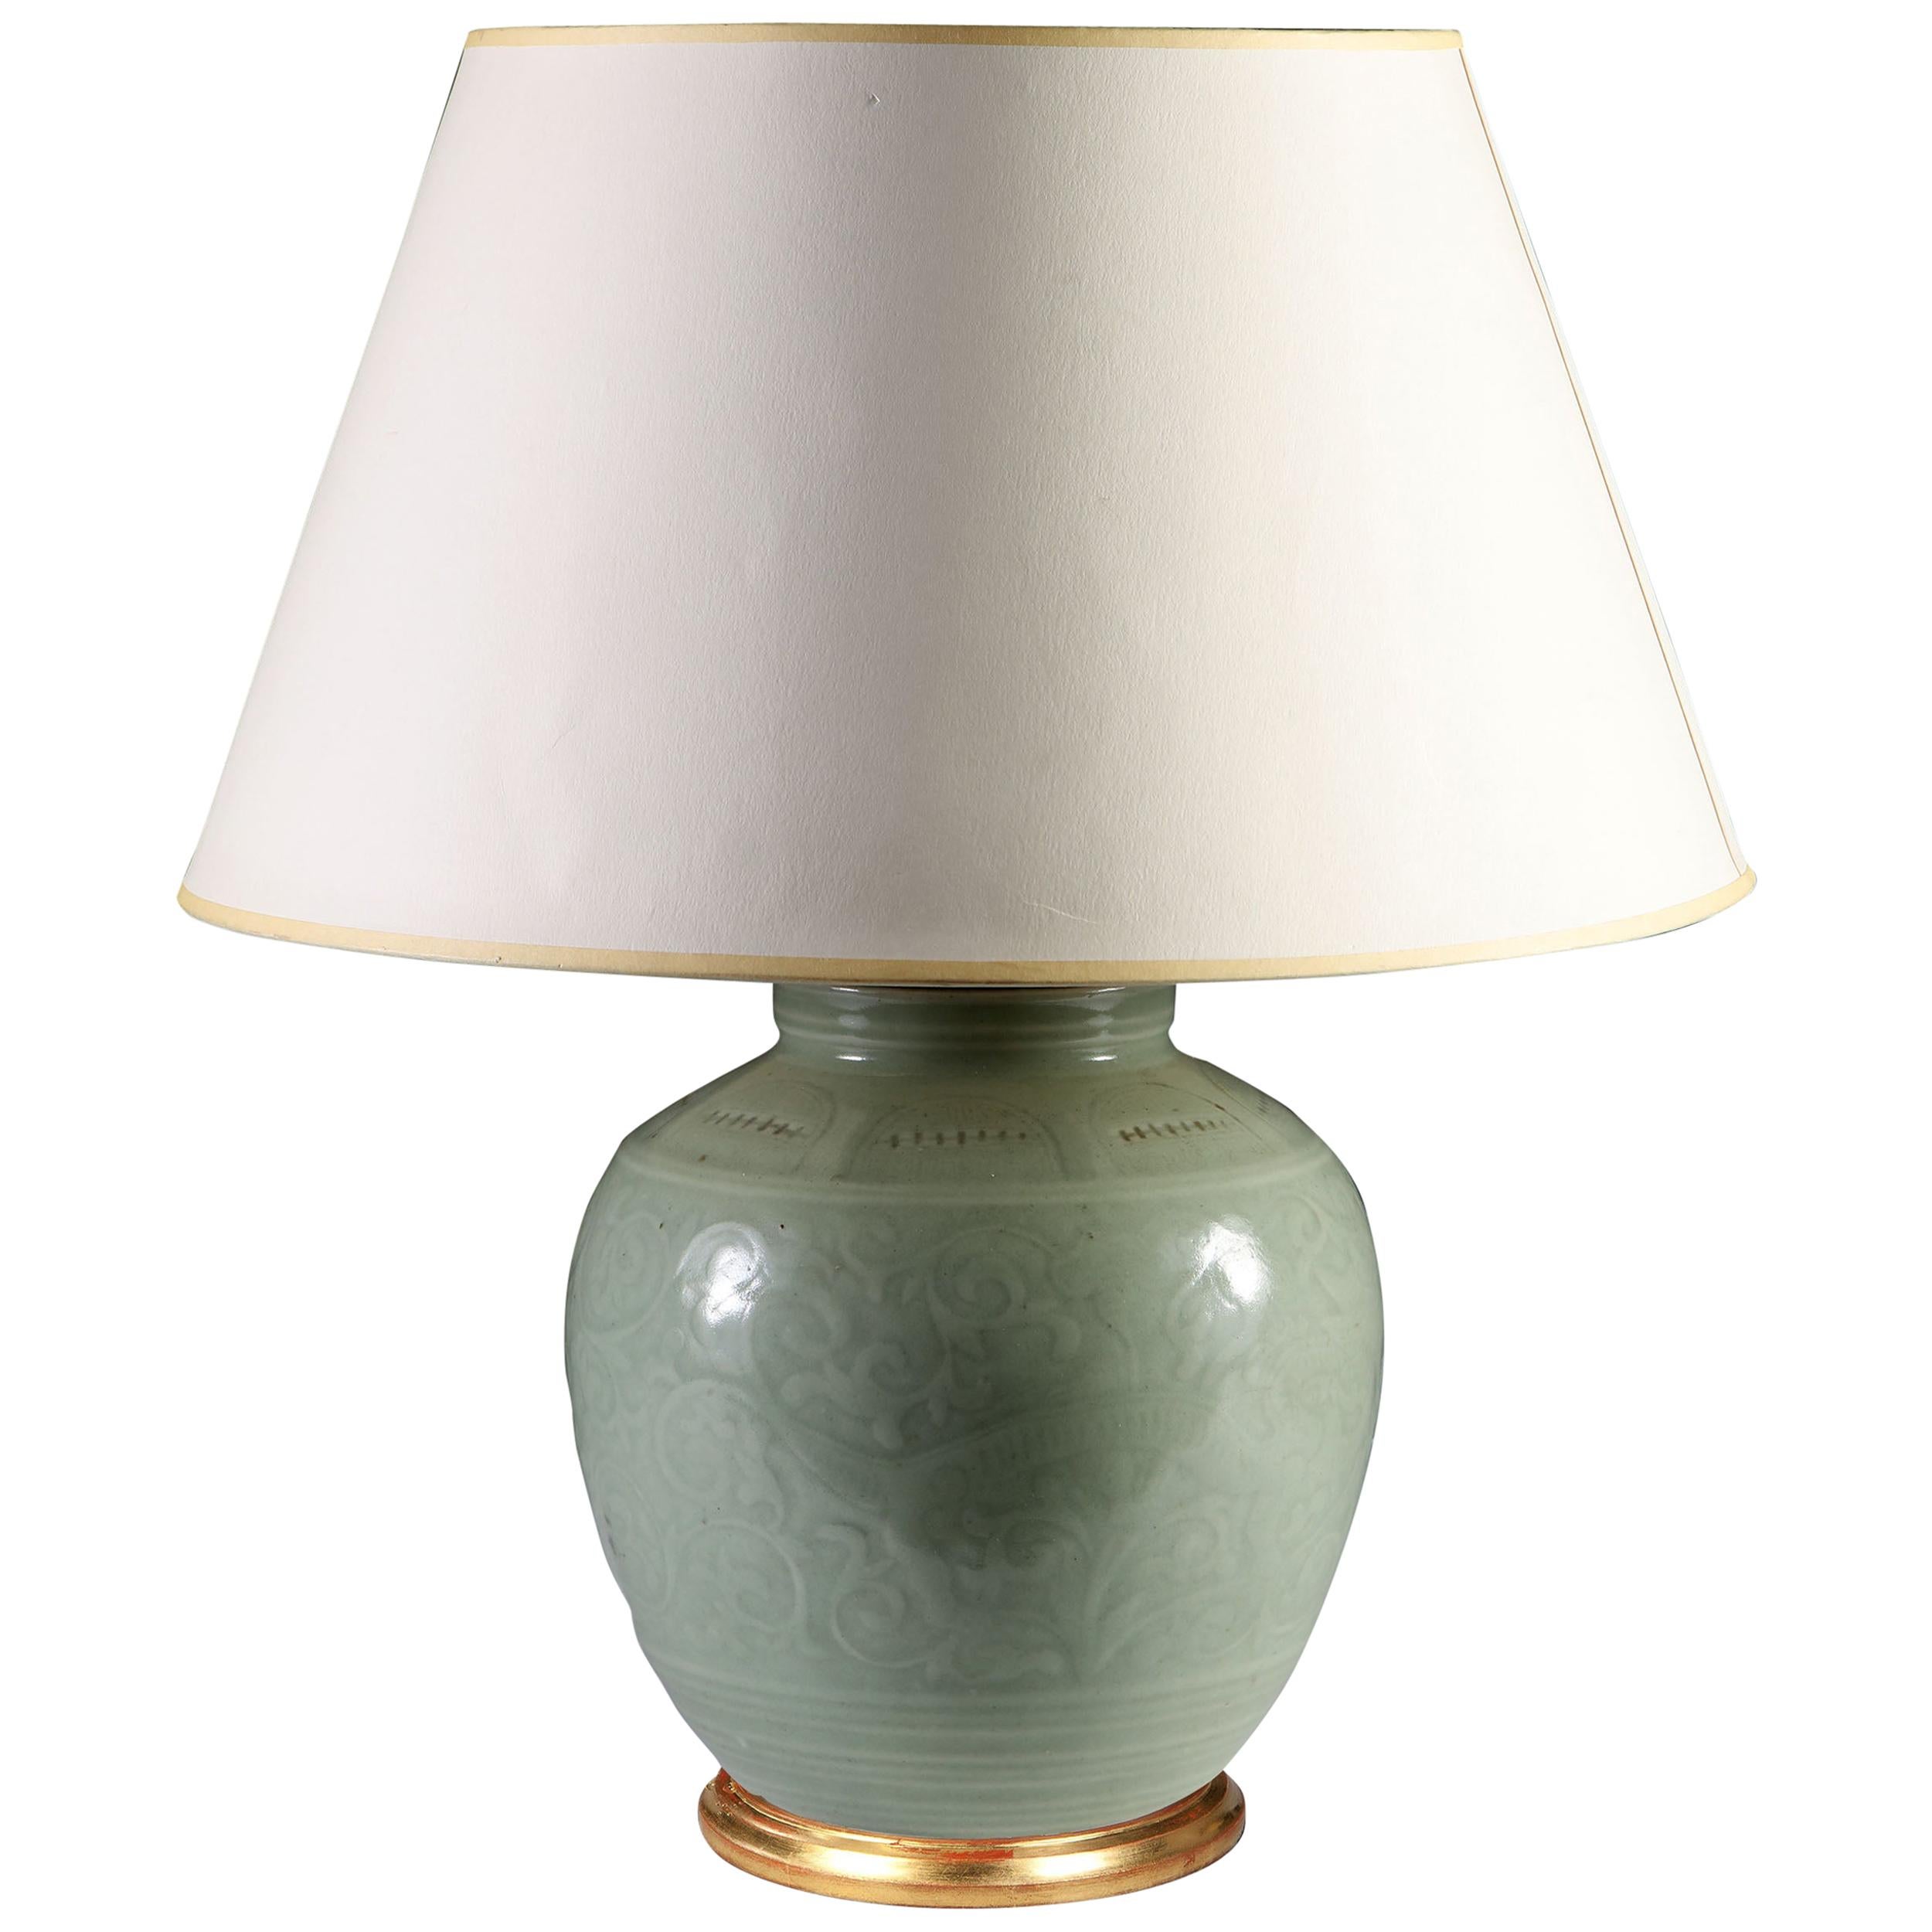 Late 19th Century Celadon Vase as a Table Lamp, with Giltwood Base